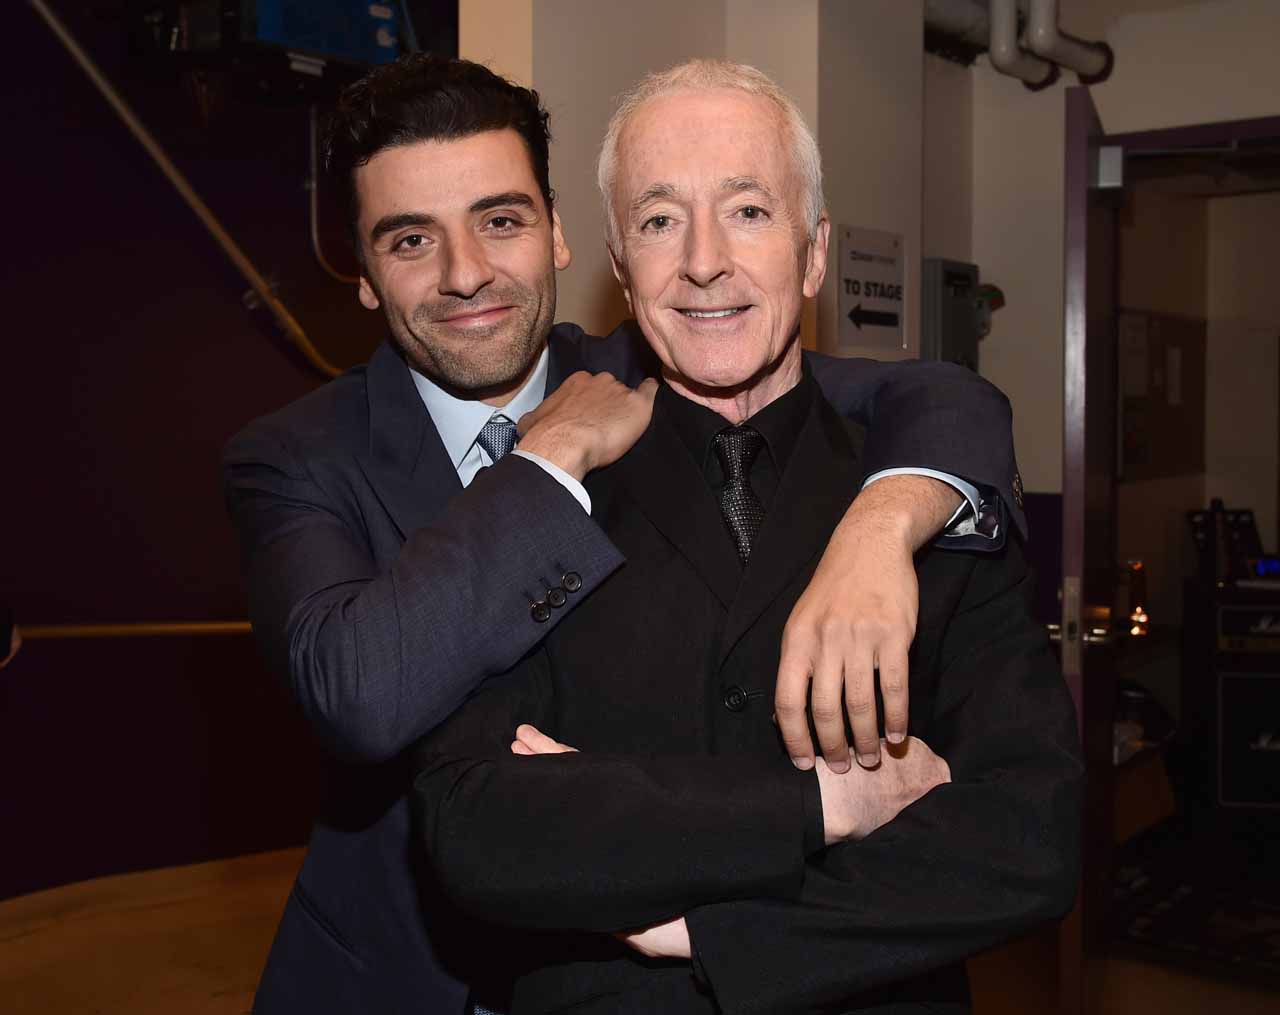 HOLLYWOOD, CA - DECEMBER 14: Actors Oscar Isaac (L) and Anthony Daniels attend the World Premiere of ?Star Wars: The Force Awakens? at the Dolby, El Capitan, and TCL Theatres on December 14, 2015 in Hollywood, California.  (Photo by Alberto E. Rodriguez/Getty Images for Disney) *** Local Caption *** Oscar Isaac;Anthony Daniels